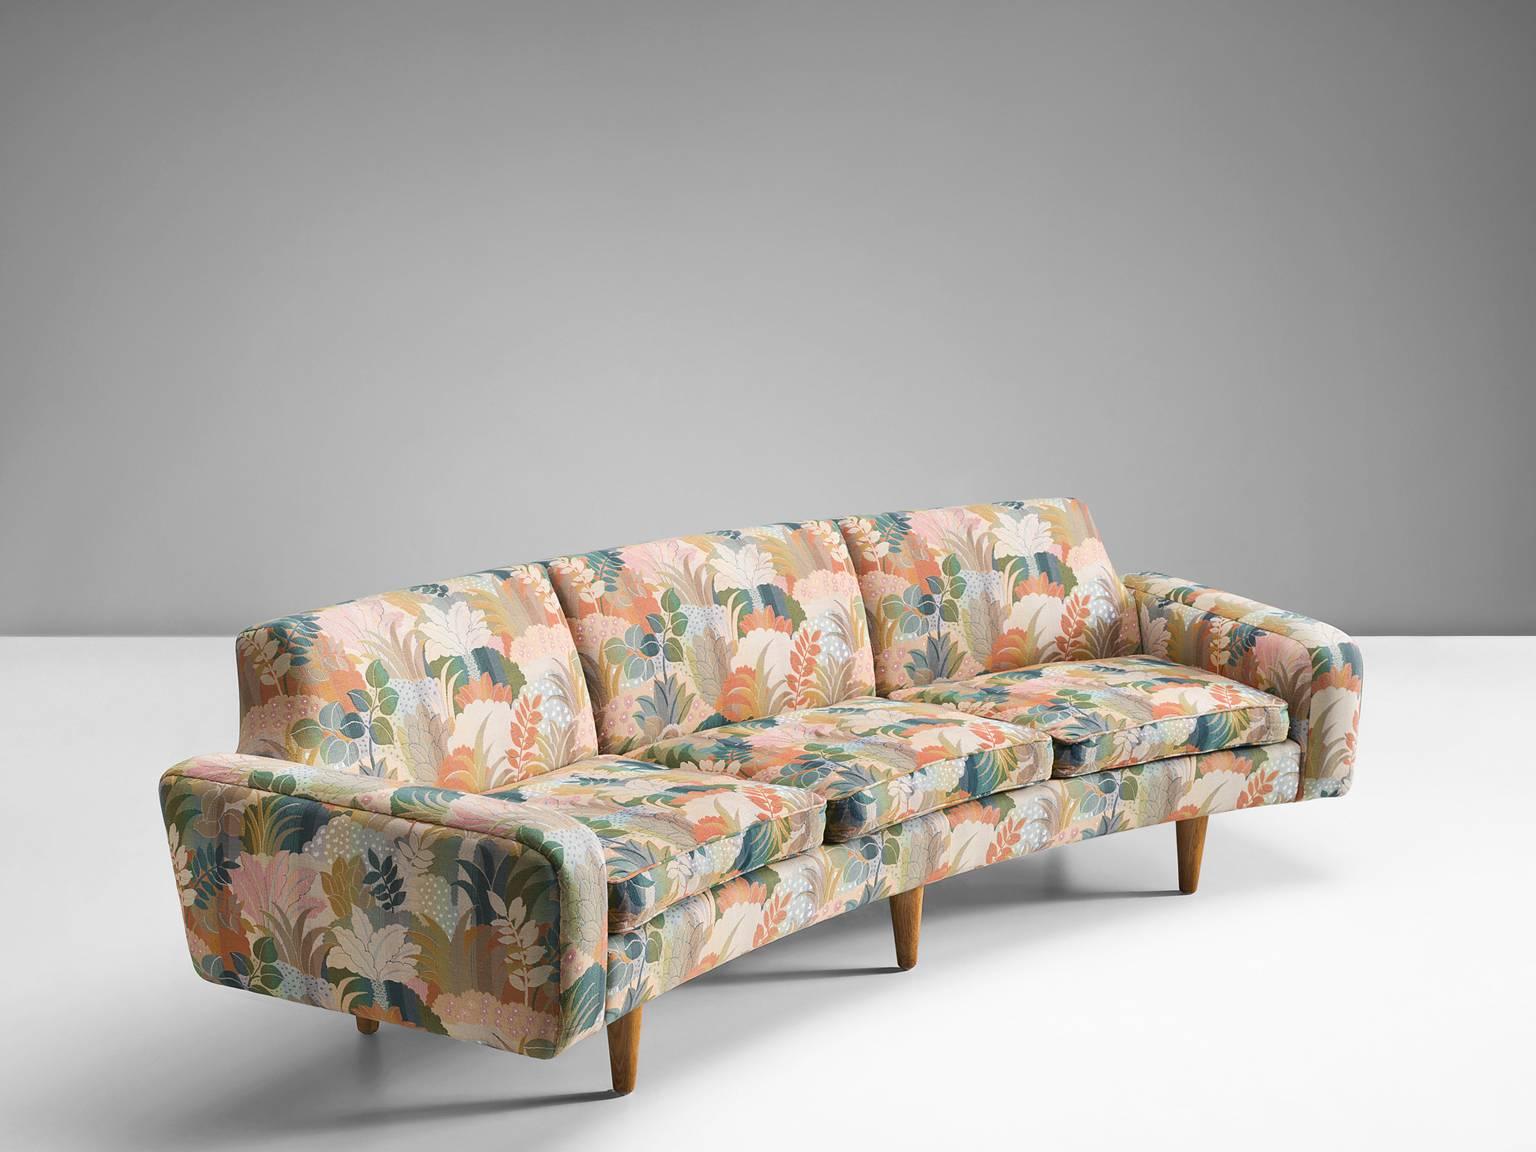 Three-seat sofa, model 450 Banana Sofa by Illum Wikkelsø for Aarhus Polstermøbelfabrik, 1960s, Denmark.

This curved three-seat sofa with a colorful all-over decorative plants. The sofa is slightly curved and has a small dent on each side of the